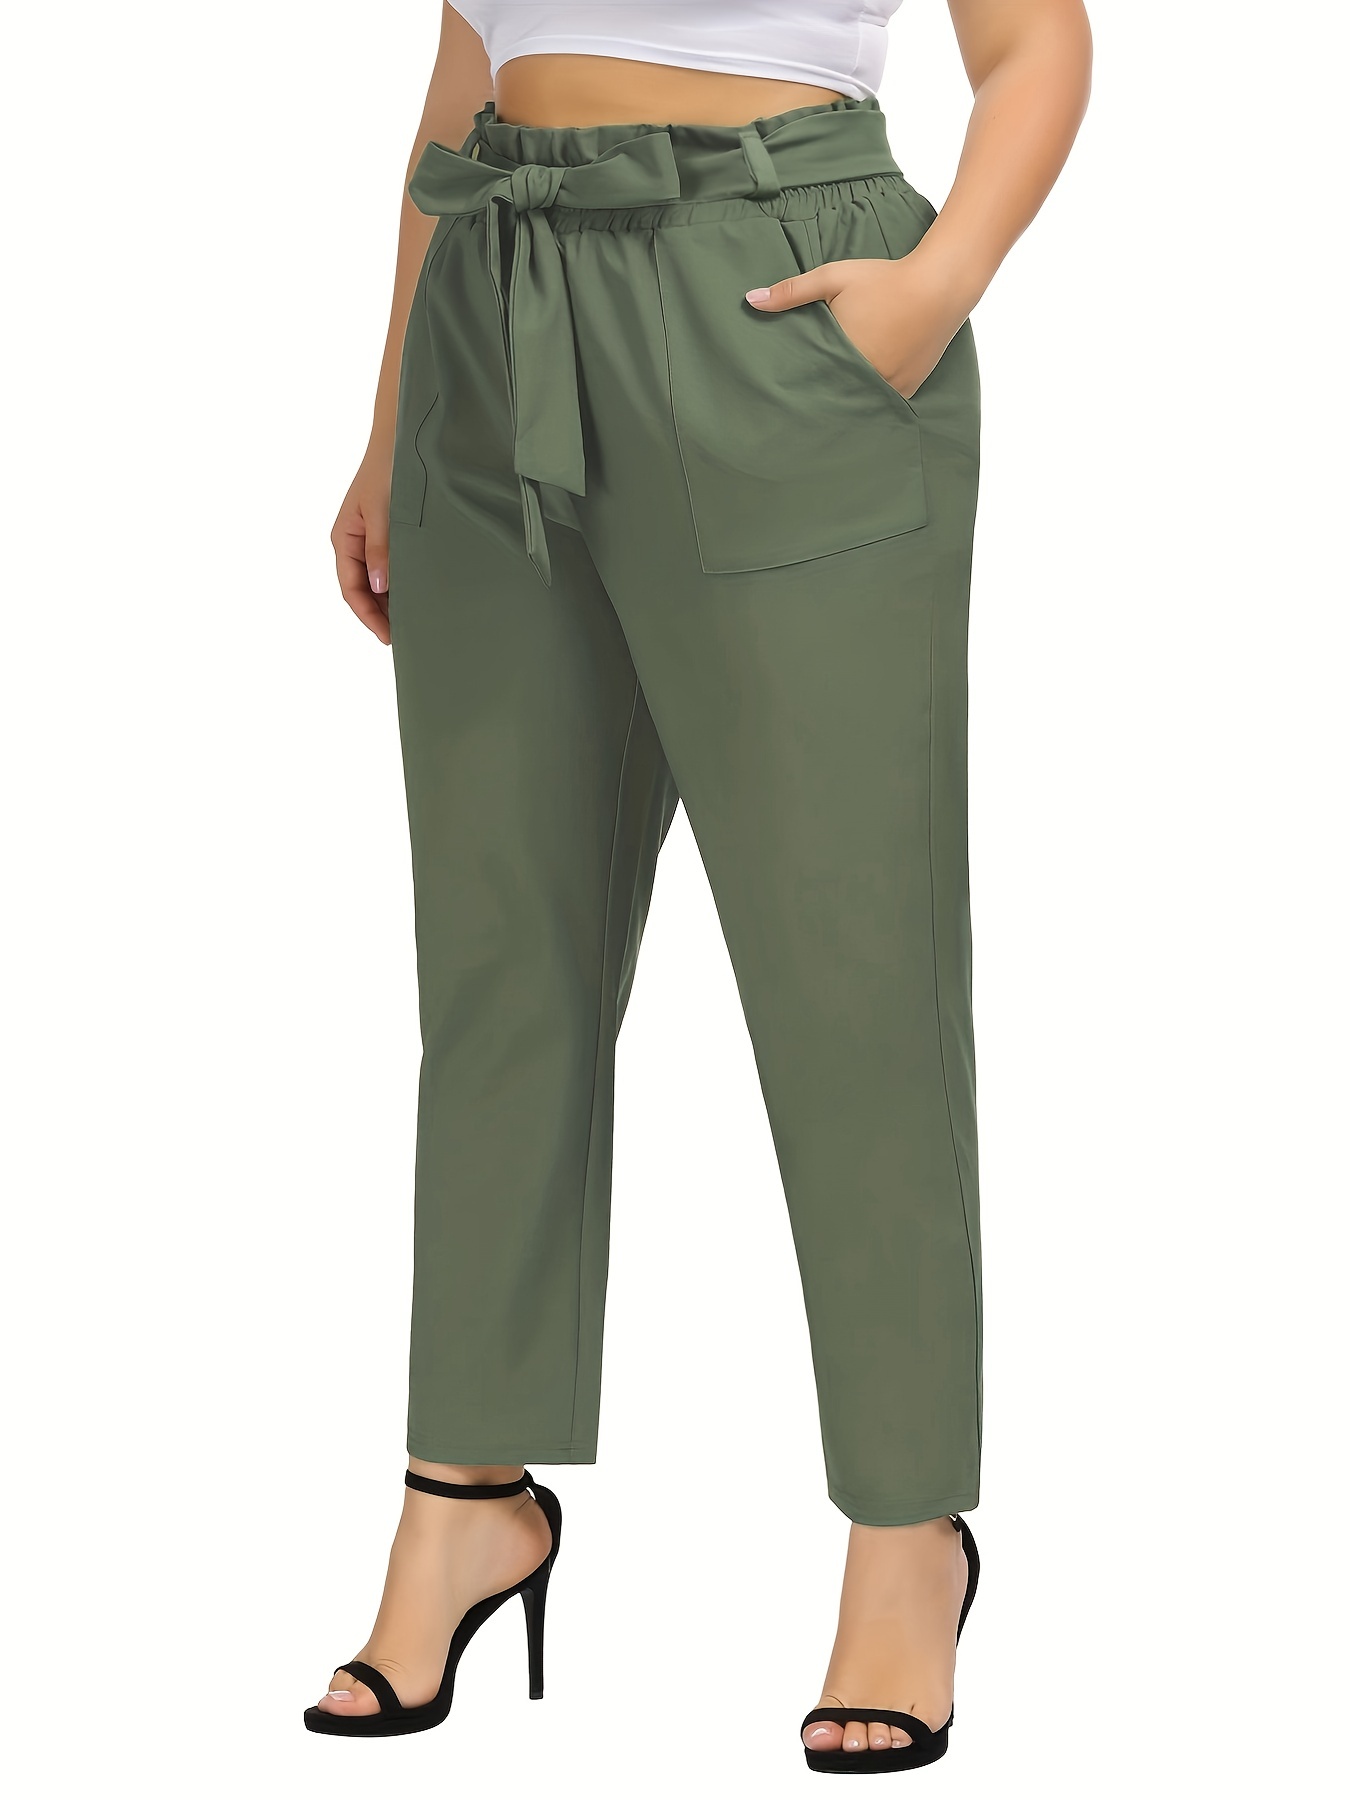 NIeyook Women's Pants Casual Trouser Paper Bag Pants Elastic High Waist Tie  Cropped Trousers Plus Size Pants for Women with Pockets Army Green at   Women's Clothing store